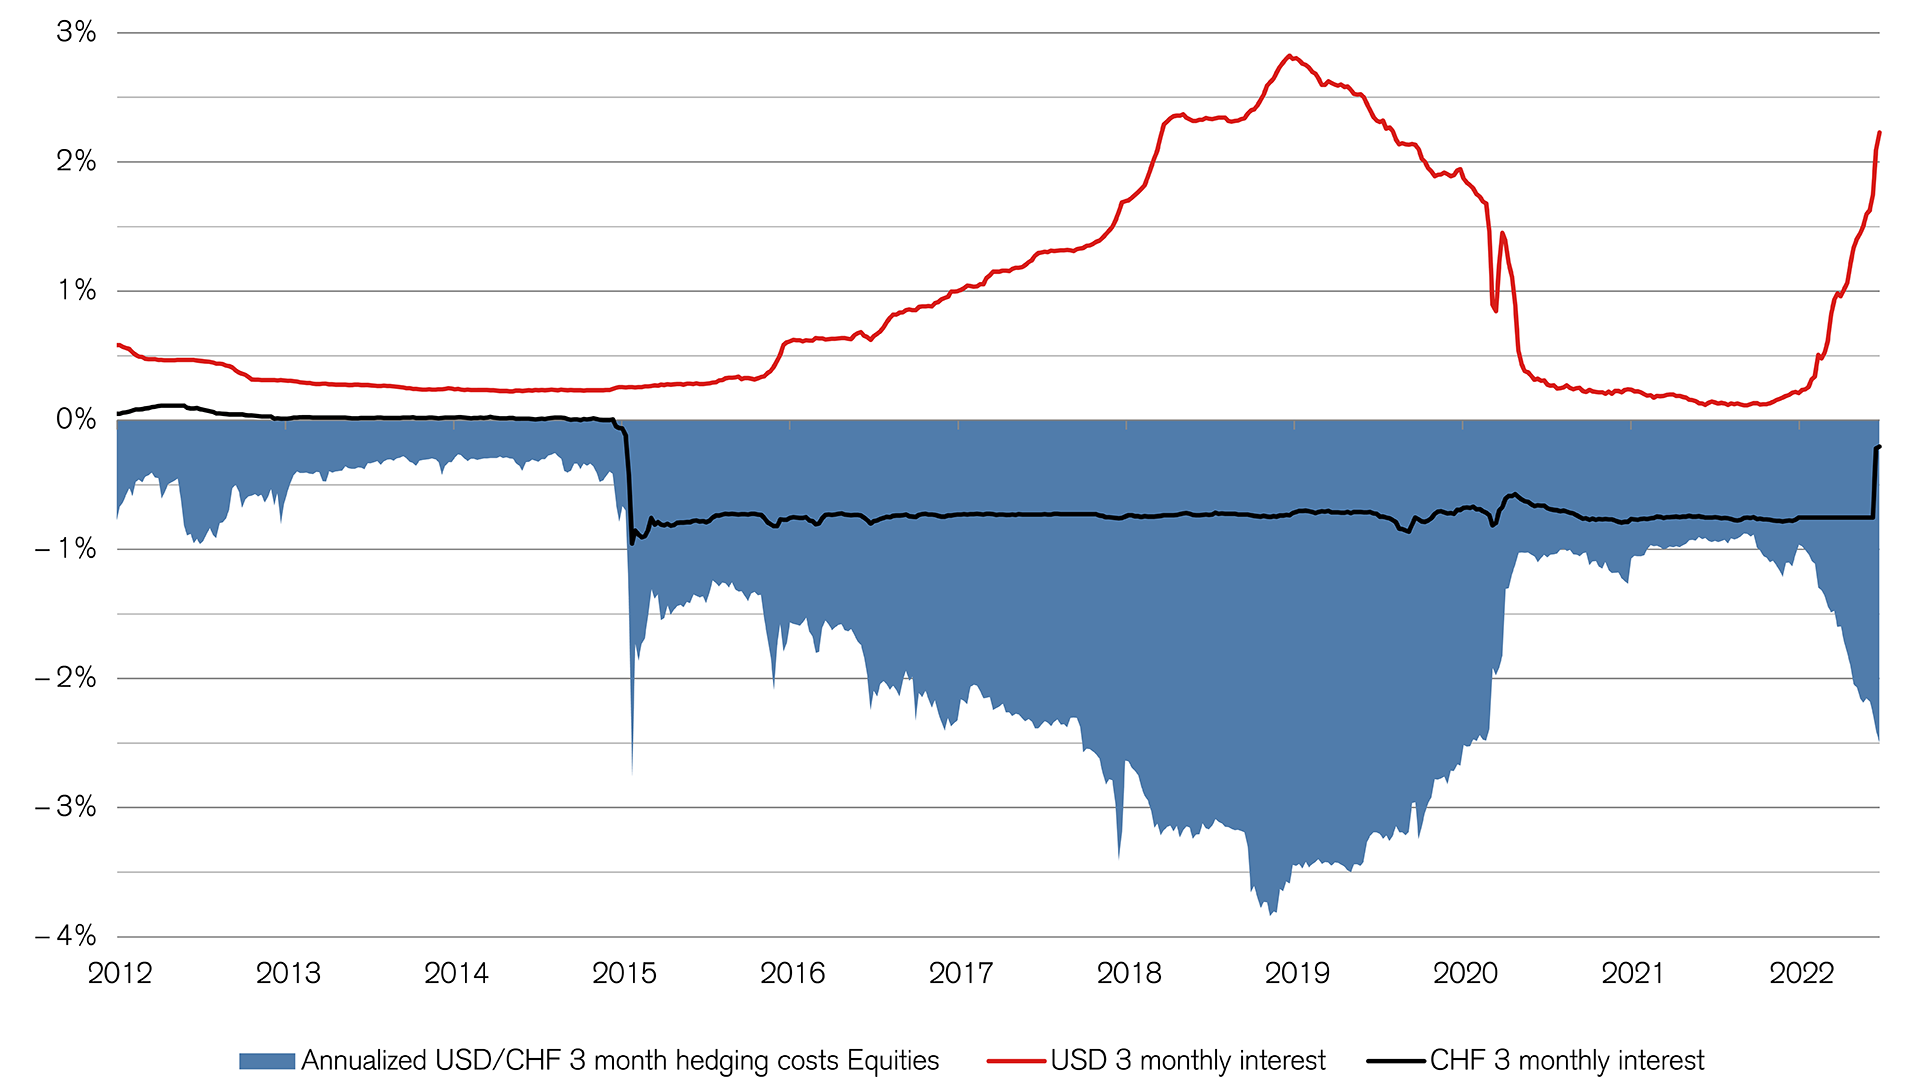 US dollar/Swiss franc interest-rate differential and hedging costs